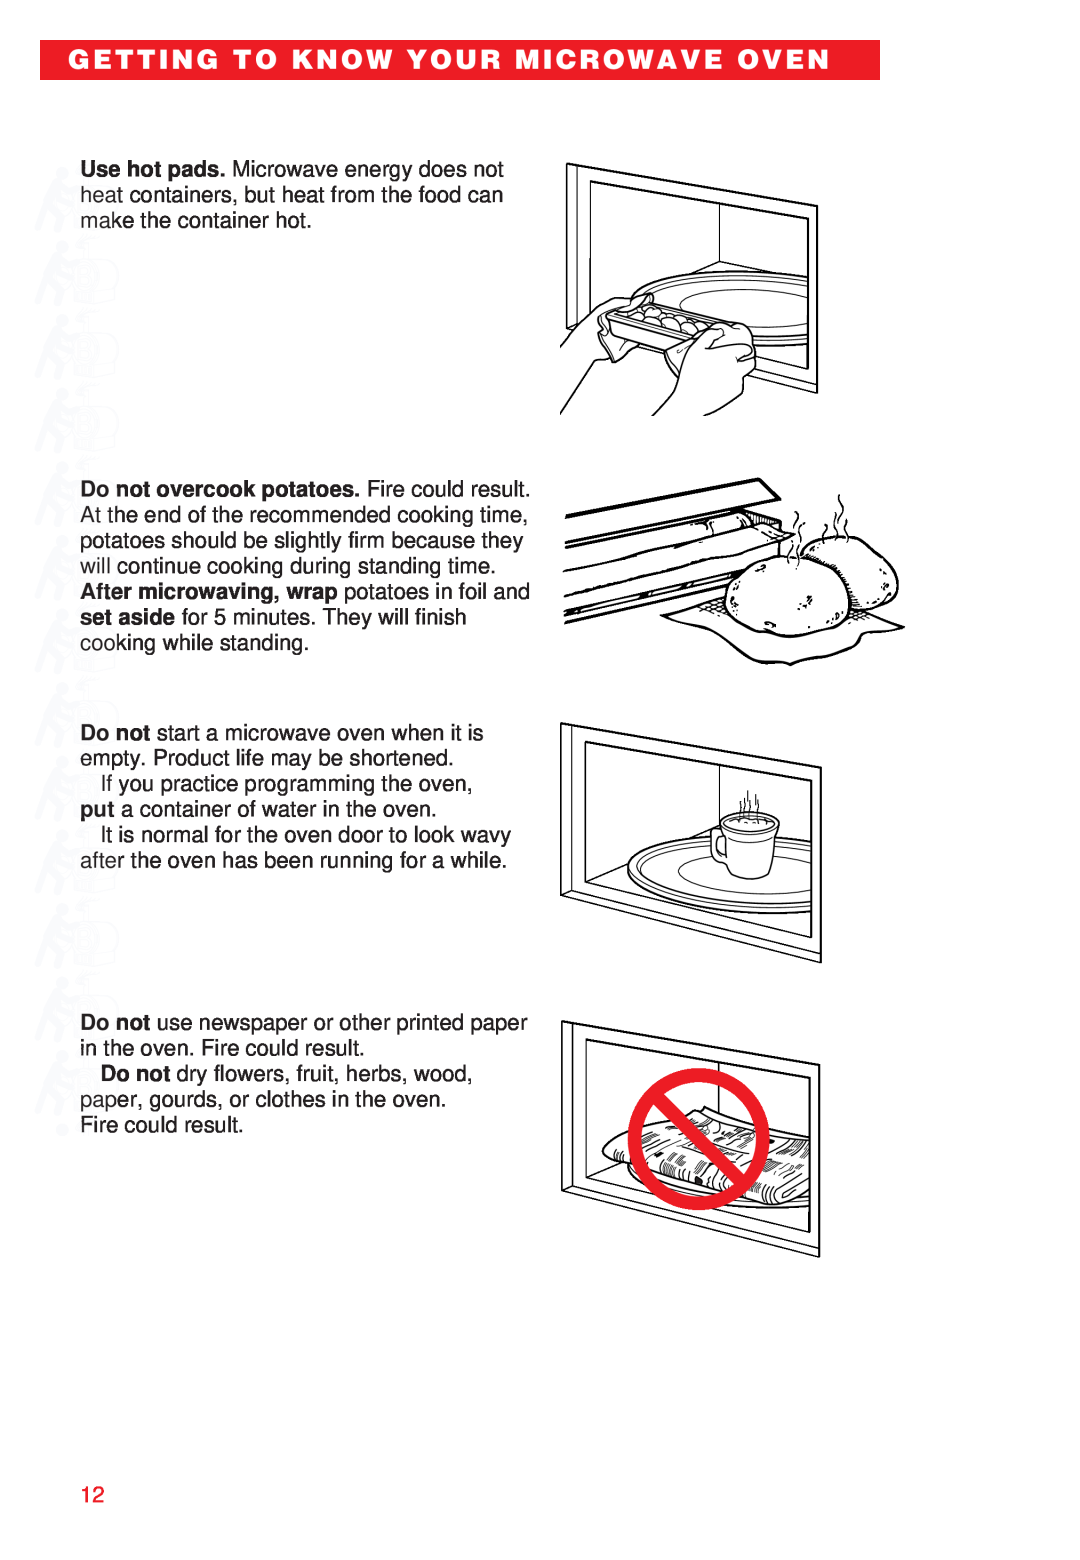 Whirlpool MT8068SE, MT8066SE Do not overcook potatoes. Fire could result, After microwaving, wrap potatoes in foil and 